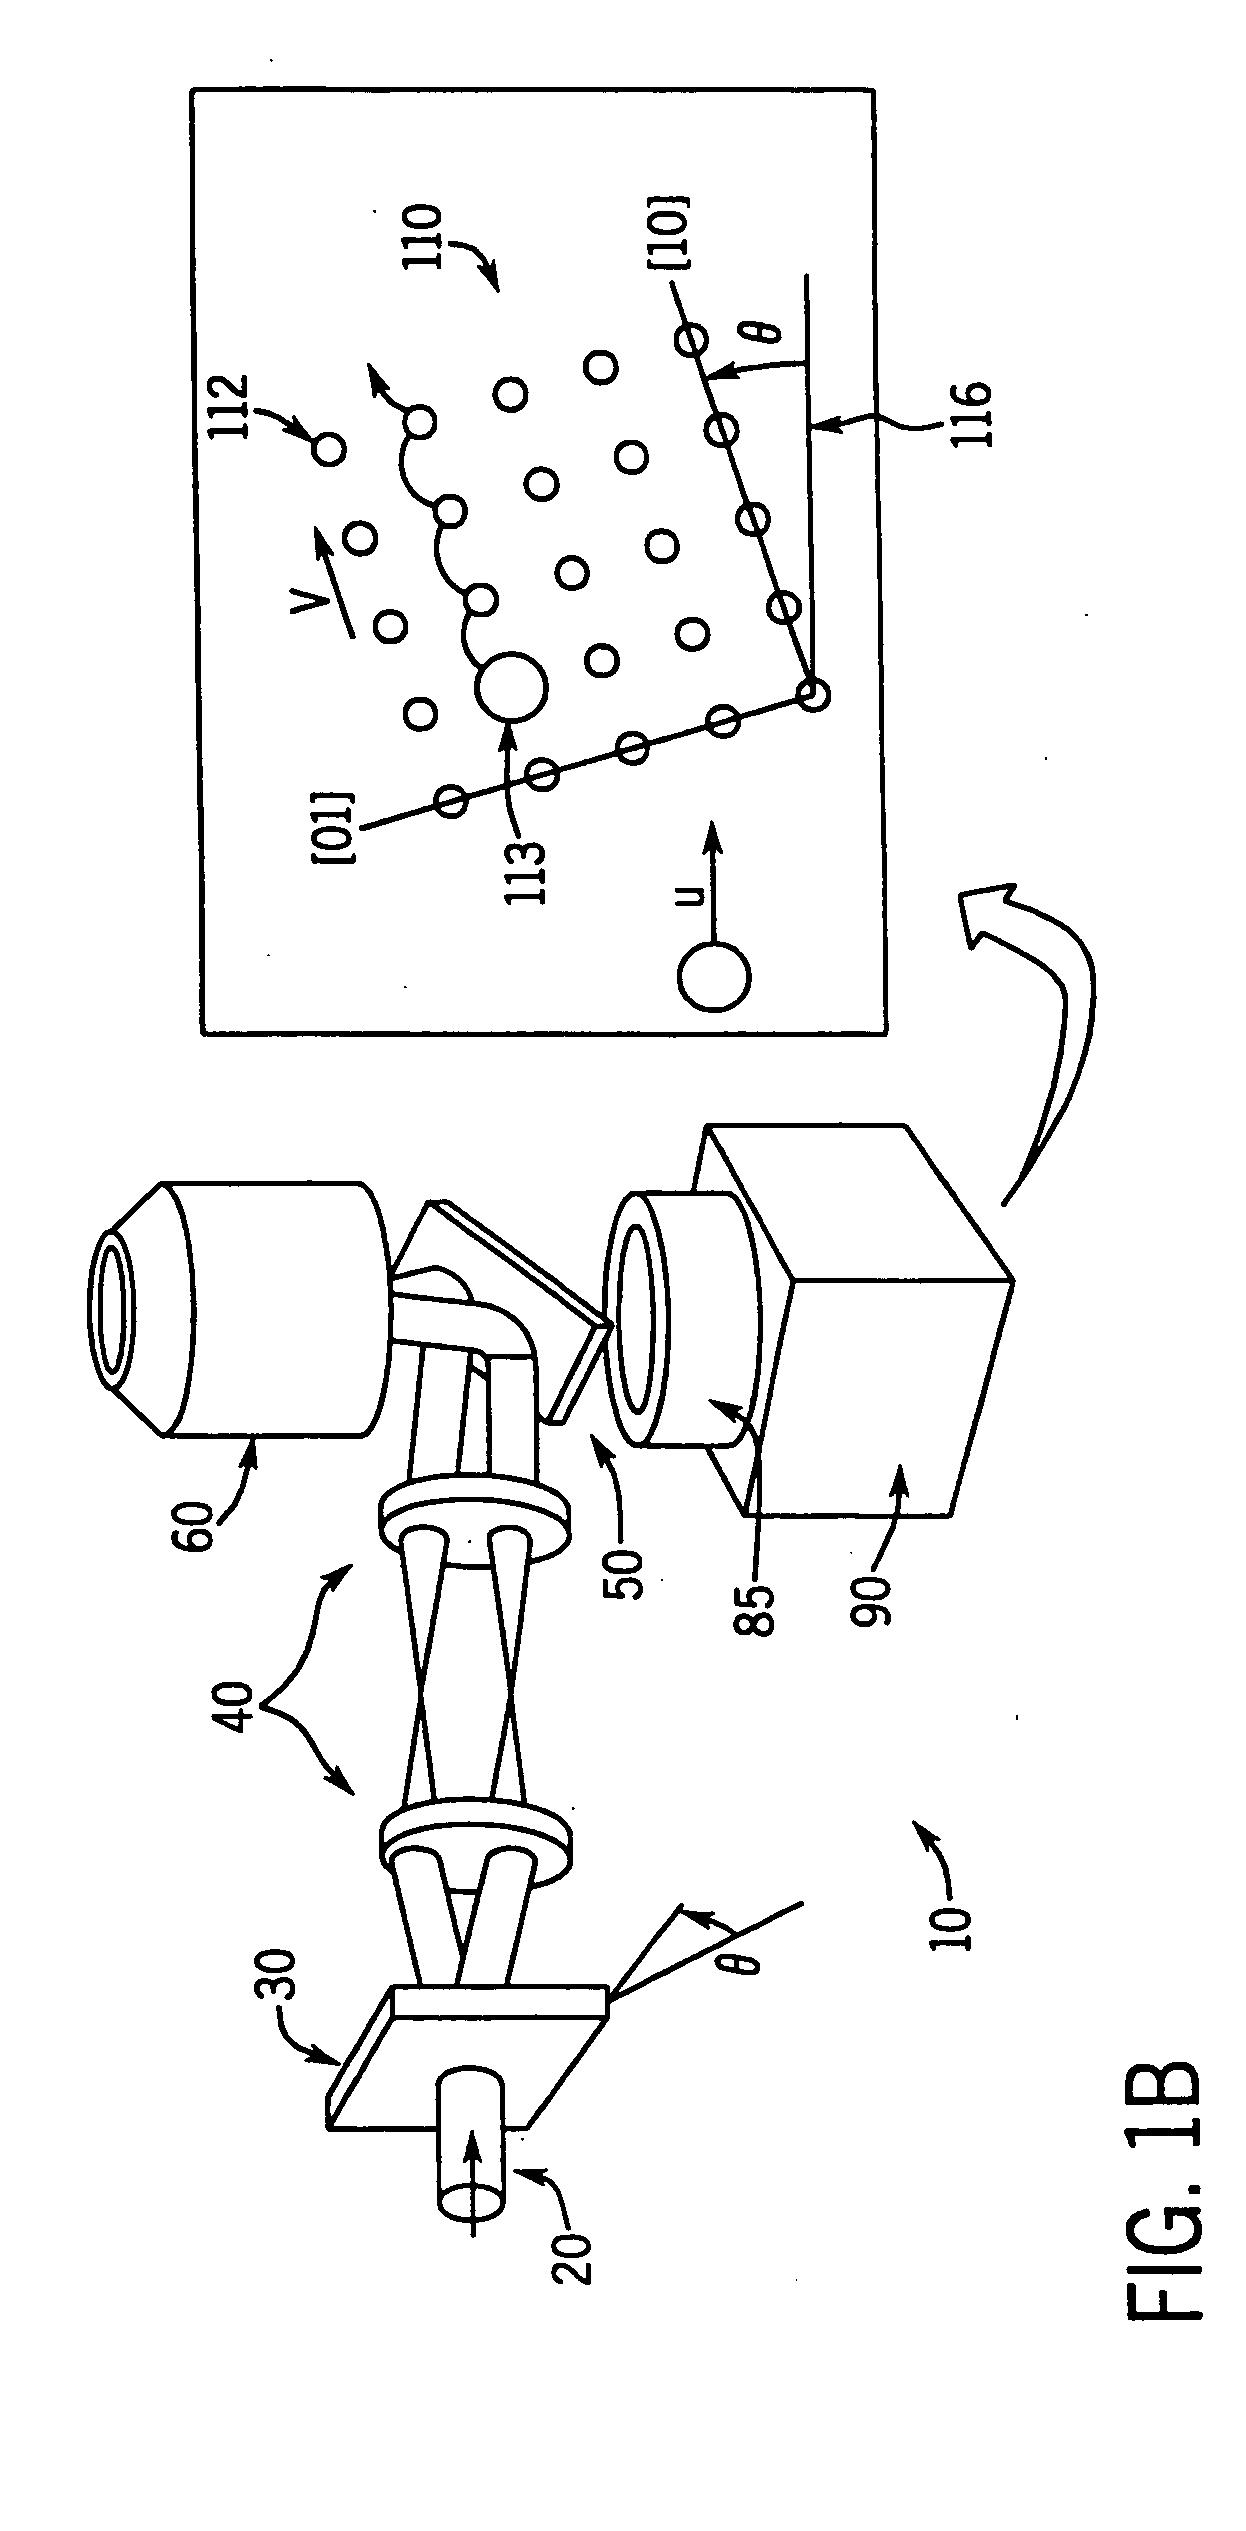 Apparatus and process for the lateral deflection and separation of flowing particles by a static array of optical tweezers